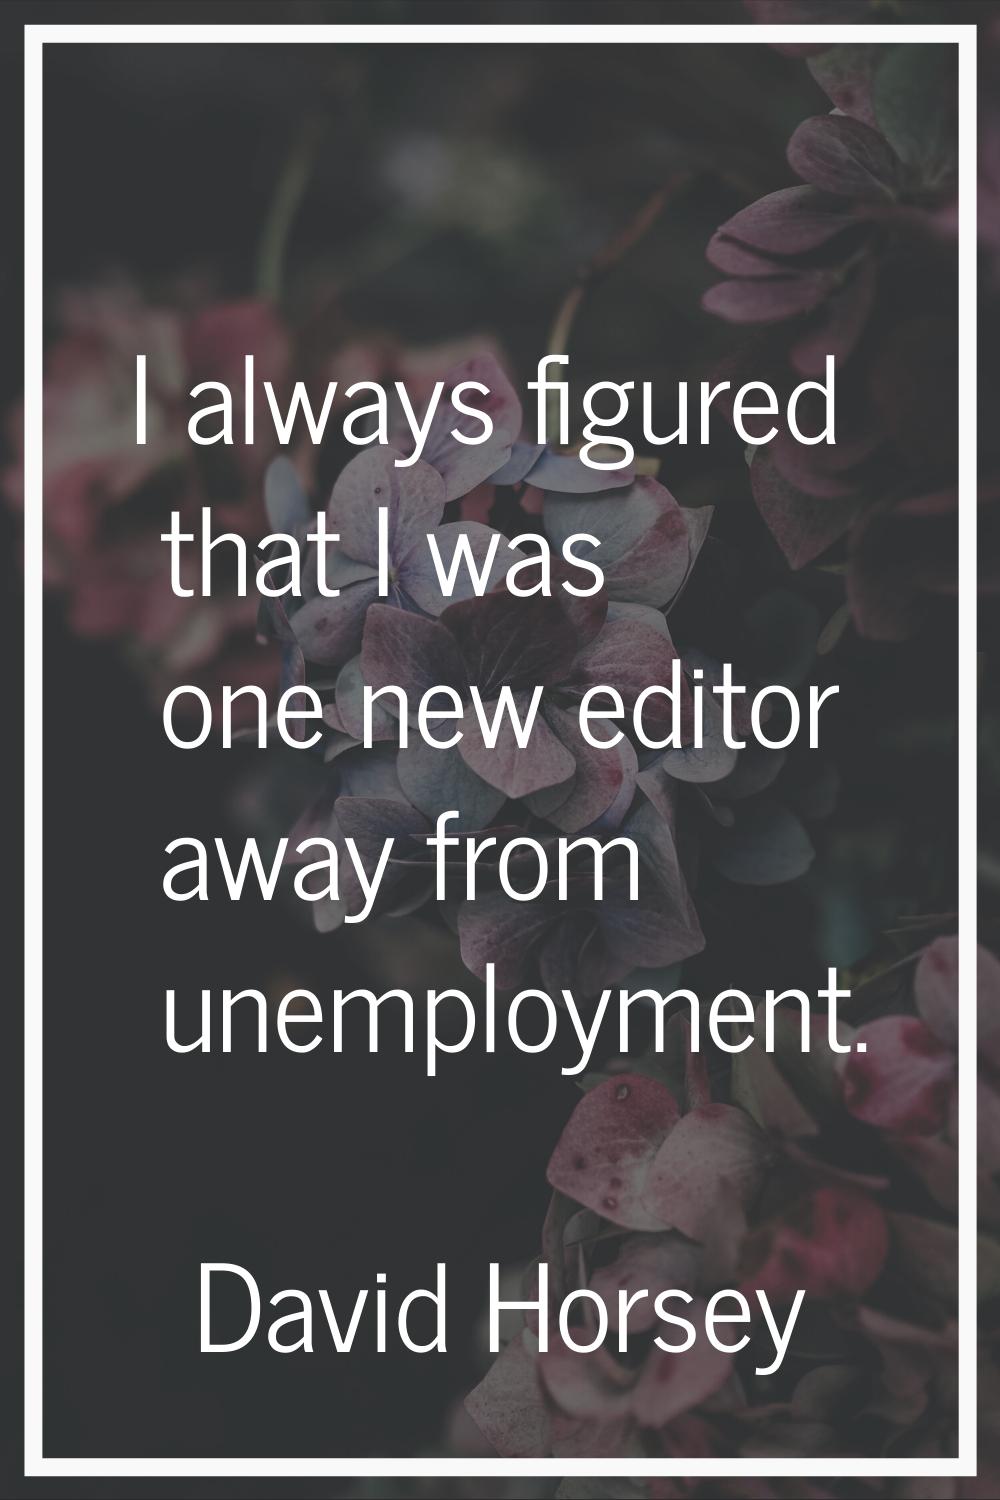 I always figured that I was one new editor away from unemployment.